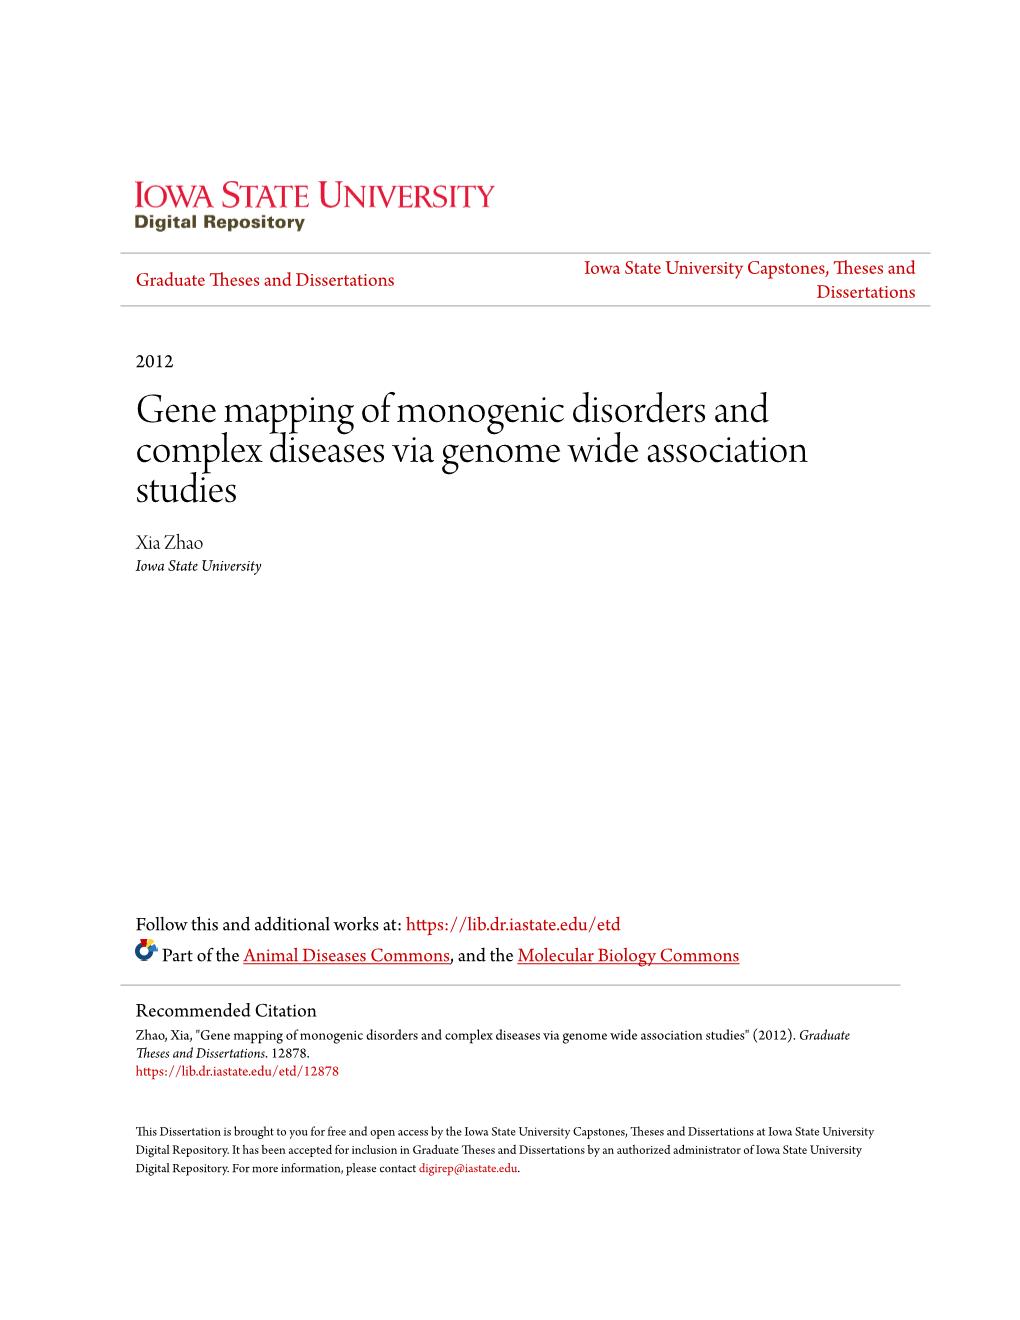 Gene Mapping of Monogenic Disorders and Complex Diseases Via Genome Wide Association Studies Xia Zhao Iowa State University